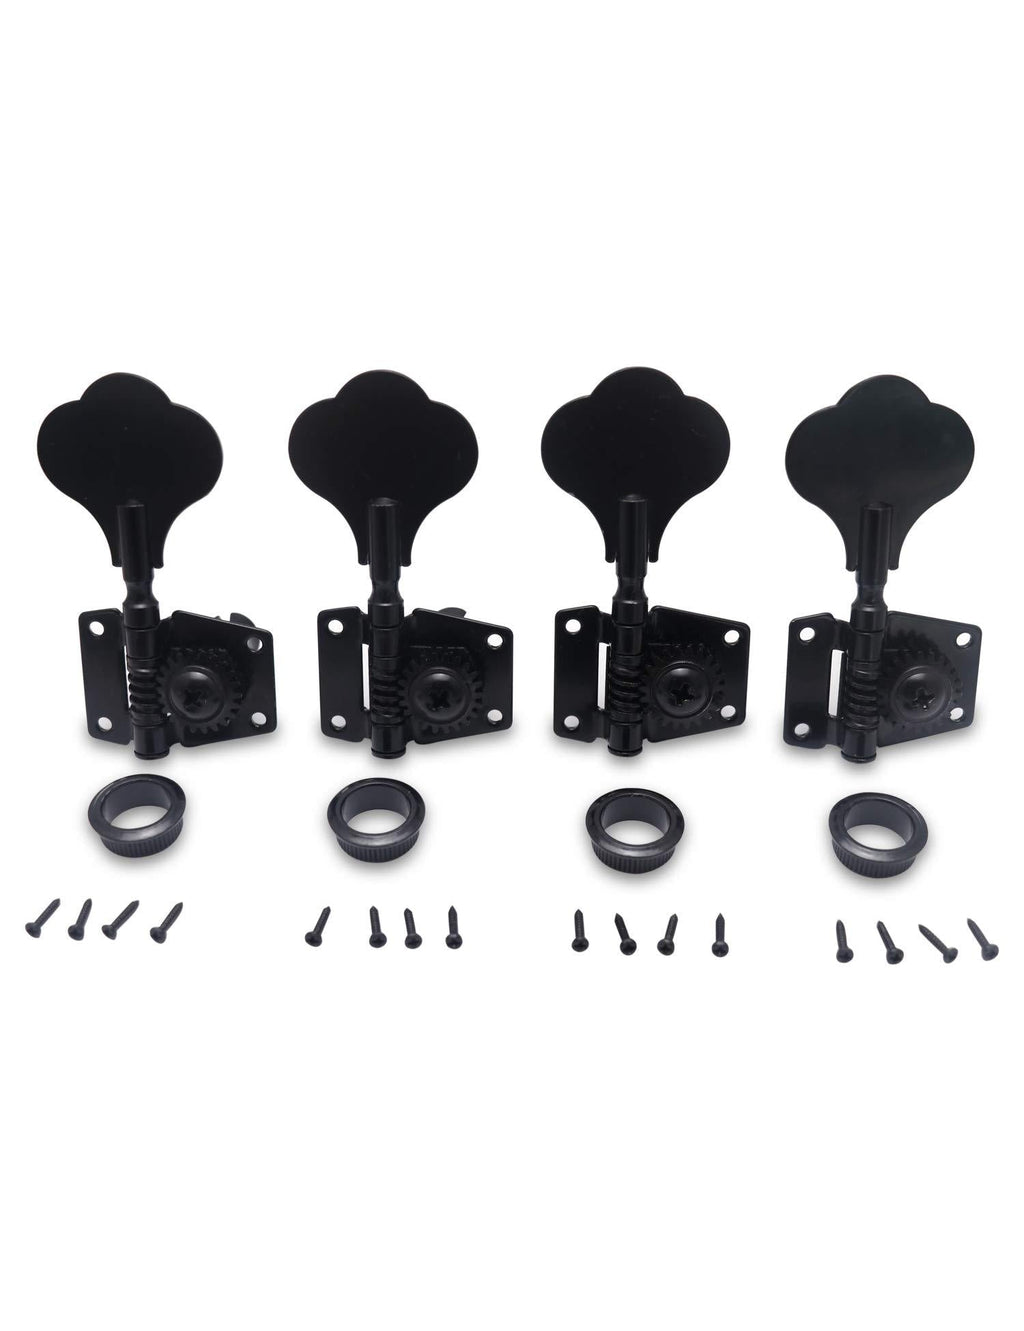 Metallor Vintage Open Gear Machine Heads Tuners Tuning Pegs 4 In Line Right Hand Guitar Parts replacement for P Bass J Bass Black 4PCS 4R-Black